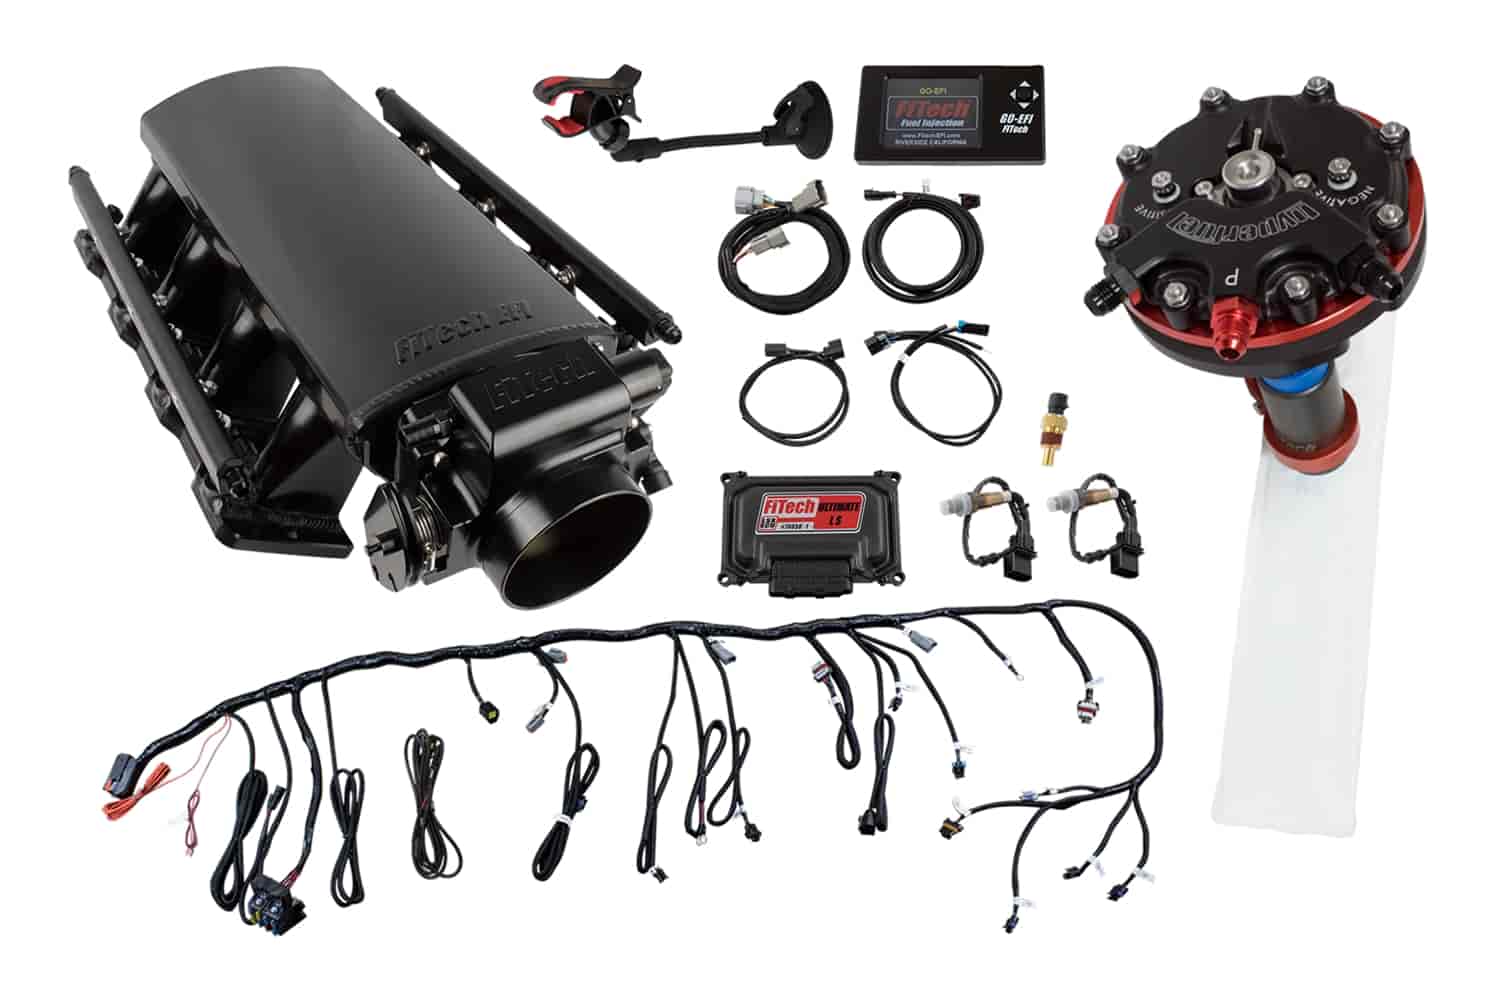 Ultimate LS EFI Induction System LS3/L92 500 HP with Hy-Fuel Single Pump Regulated In-Tank Retrofit Kit